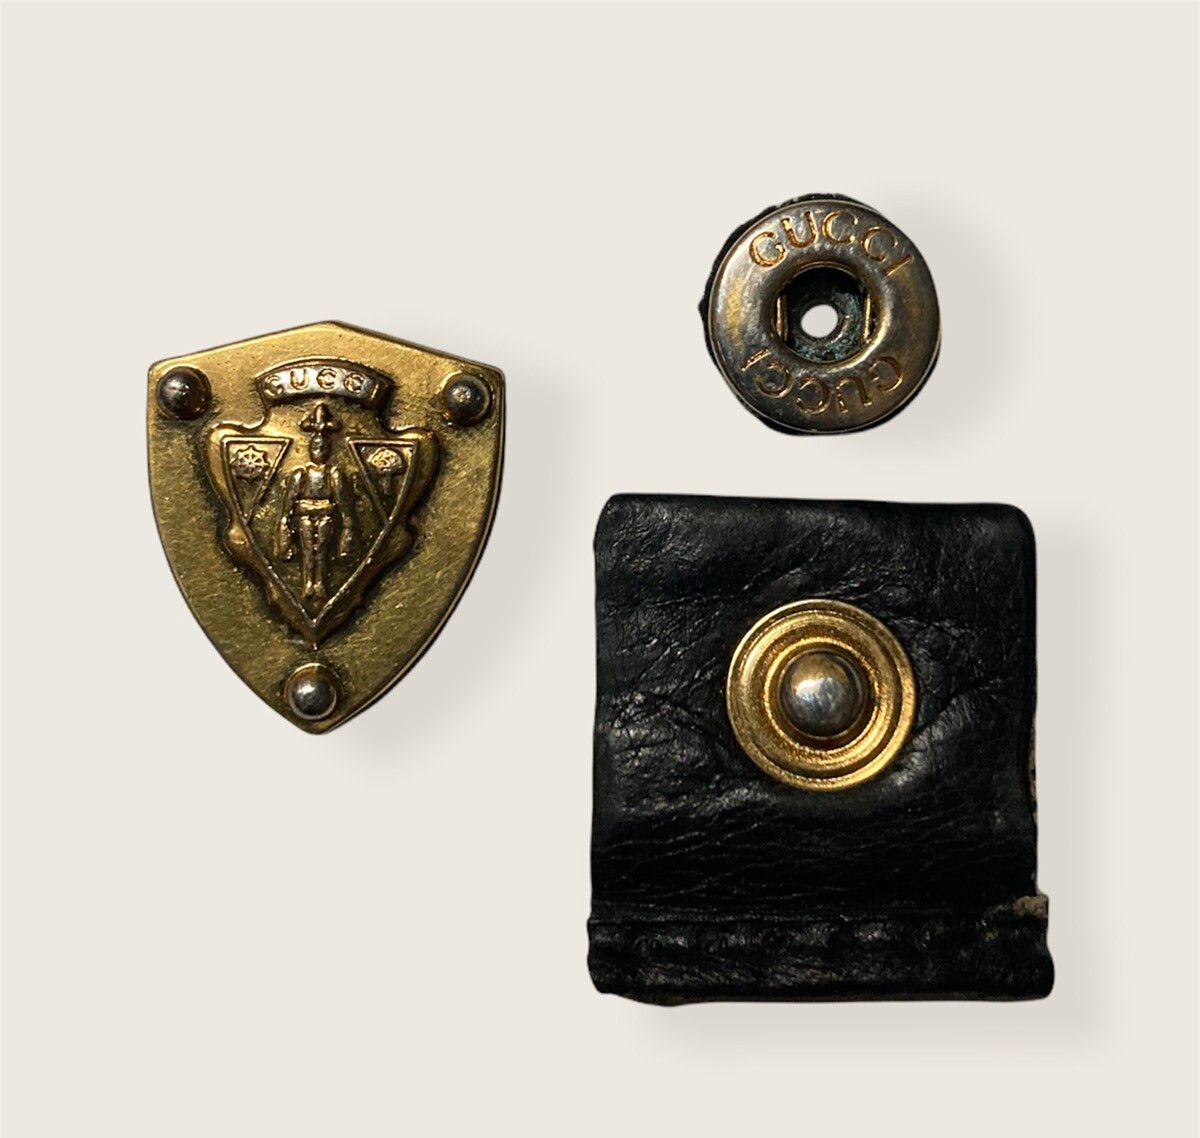 Gucci Crest Pin Emblem and Button Accessories - 1